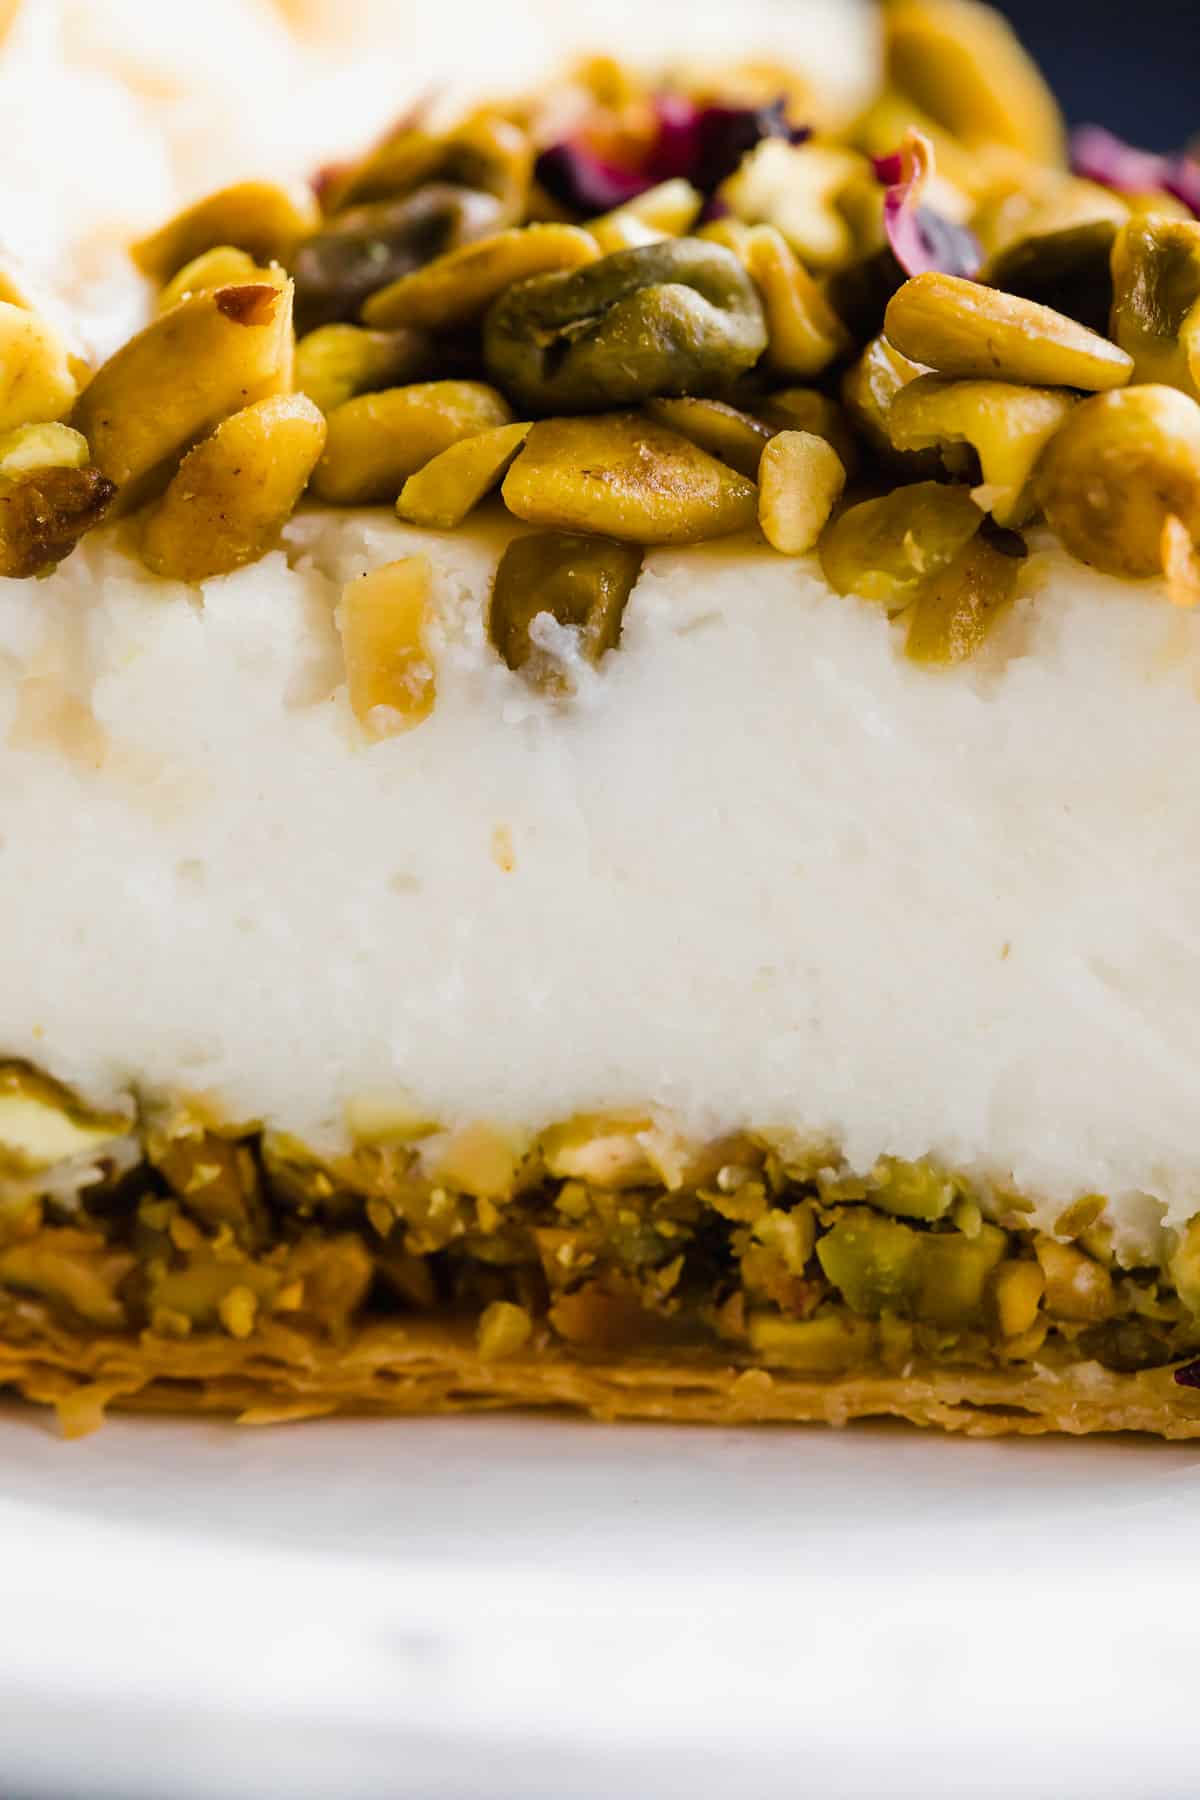 close up view of cross section slice of baklava cheesecake